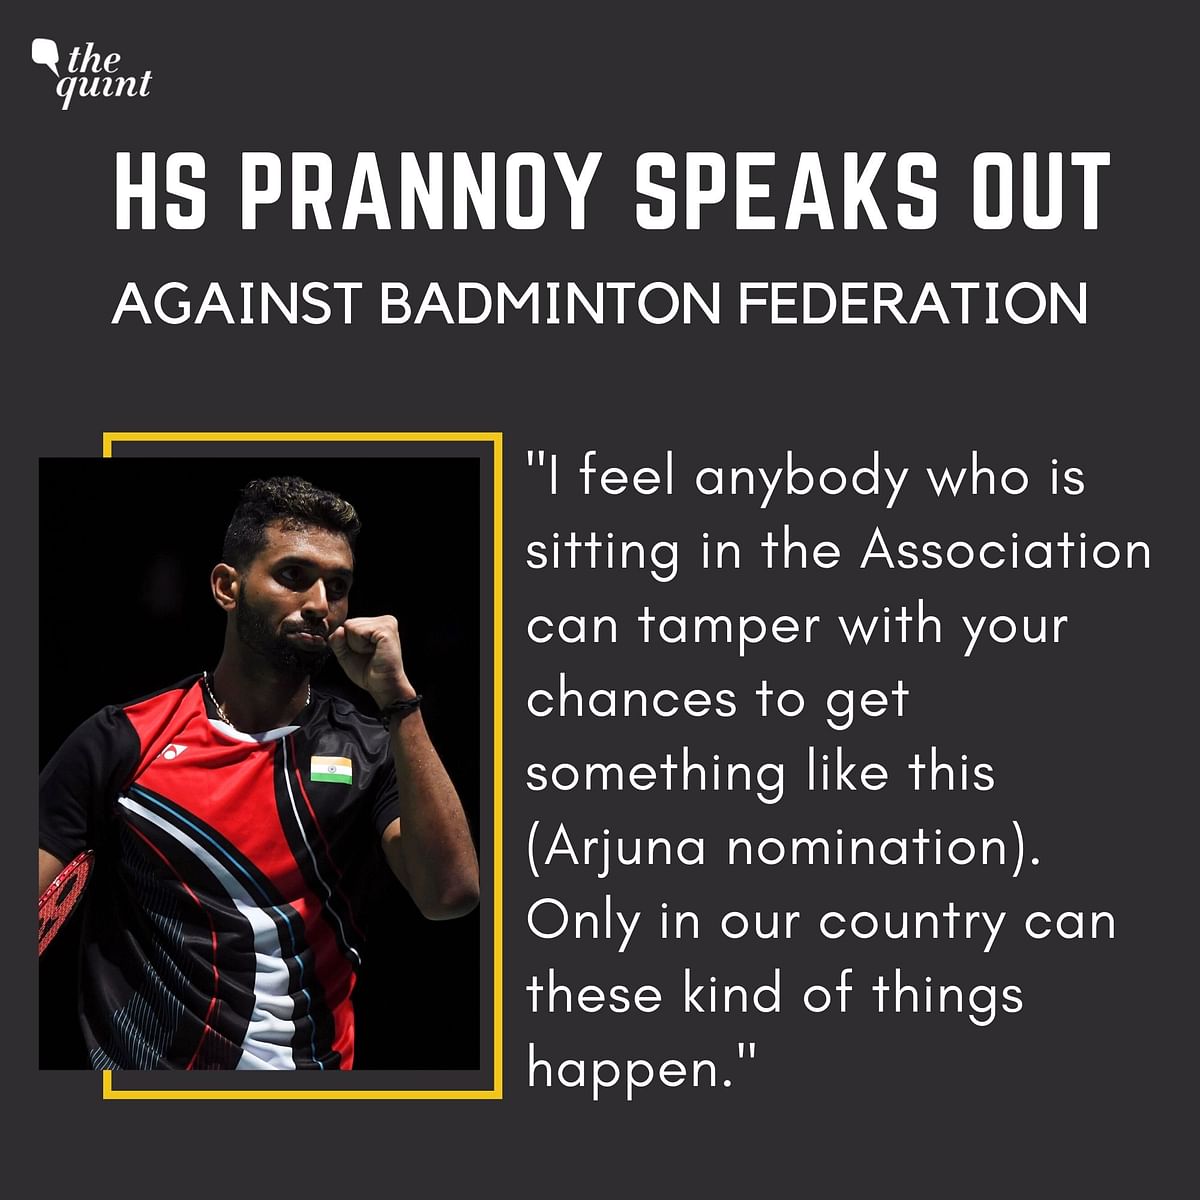 HS Prannoy hits out at the badminton federation for not nominating him for the Arjuna Award, two years in a row